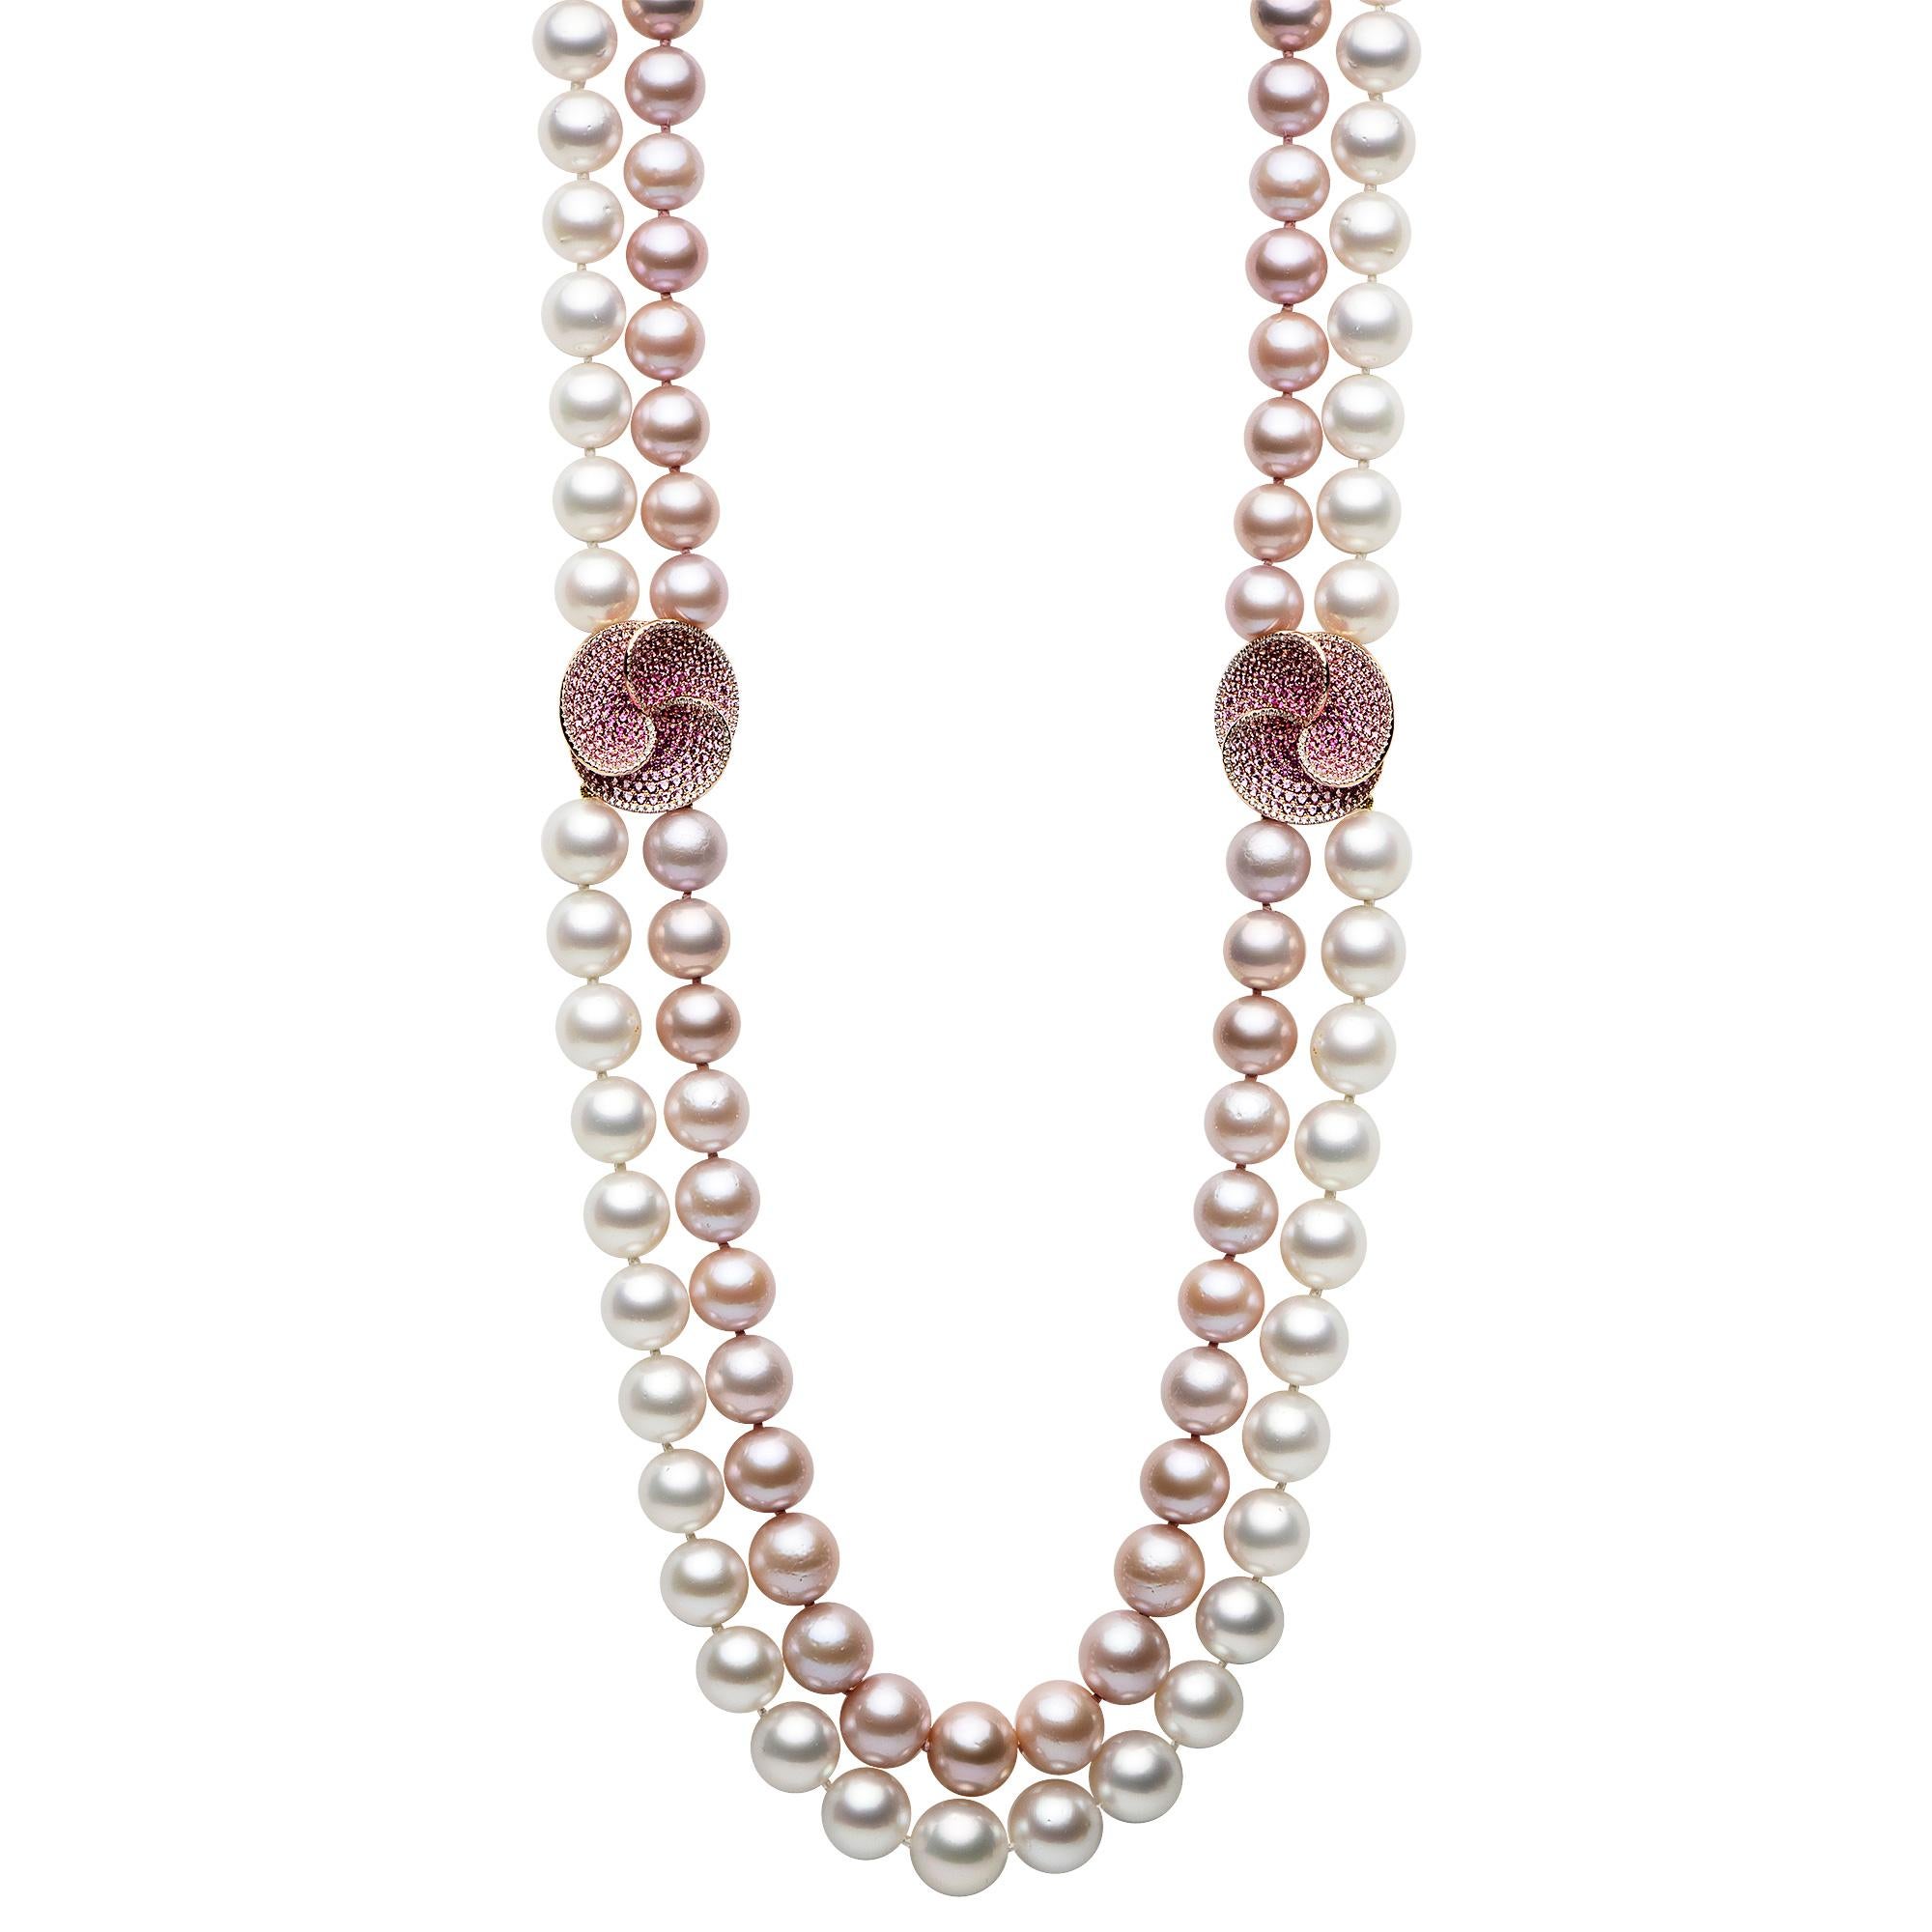 Style and glamour are in the spotlight with this exquisite south sea and pink freshwater necklace with diamond flowers. This 18-karat necklace is made from 146 pearls. The size of the pearls is 10 - 13 mm. The length of this necklace is 34 inches